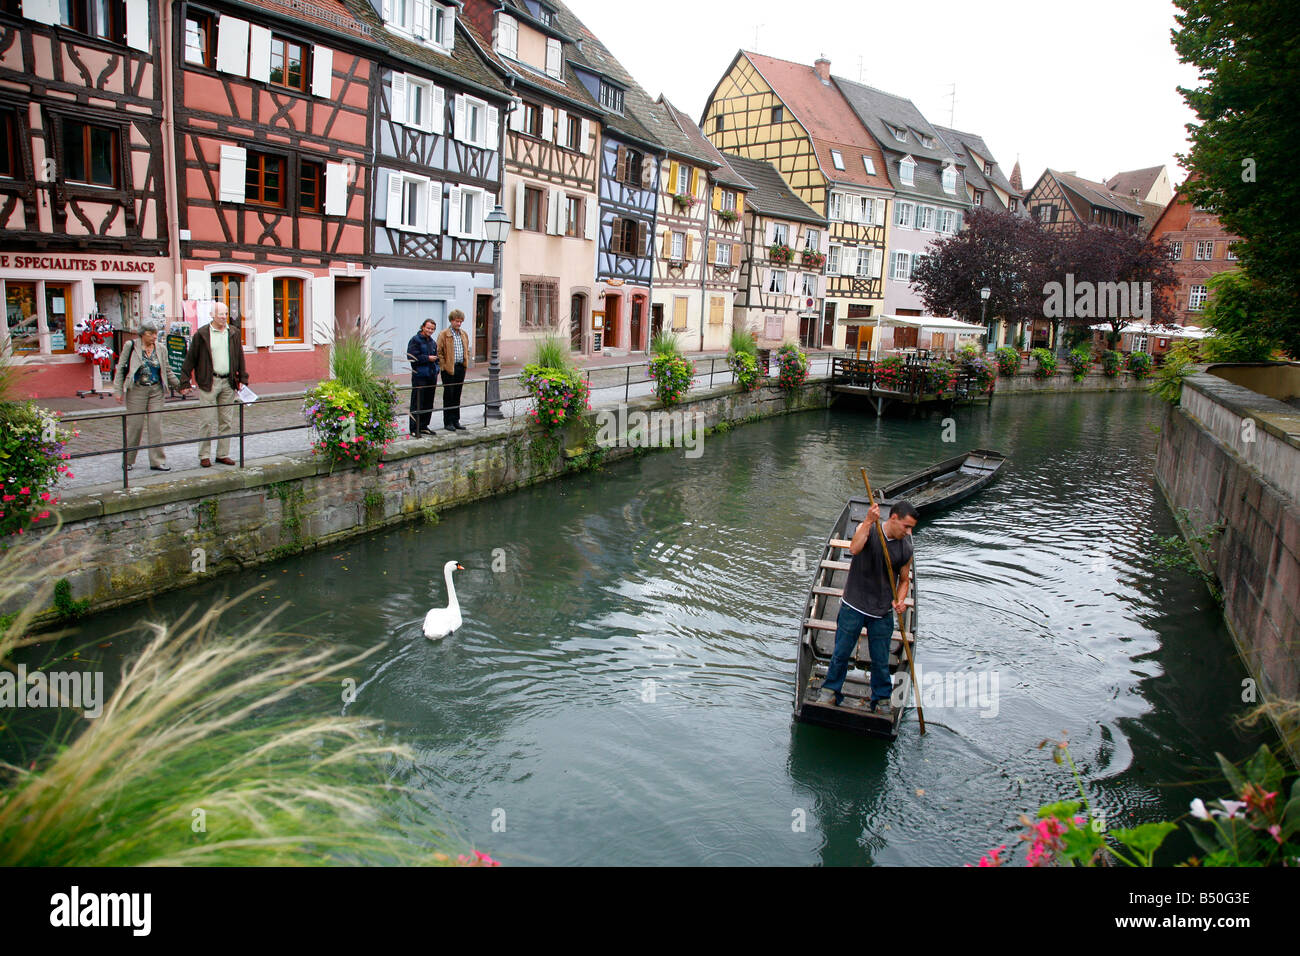 Sep 2008 Water canal and colorful half timbered houses on quai de la Poissonnerie street in Petite Venise Colmar Alsace France Stock Photo